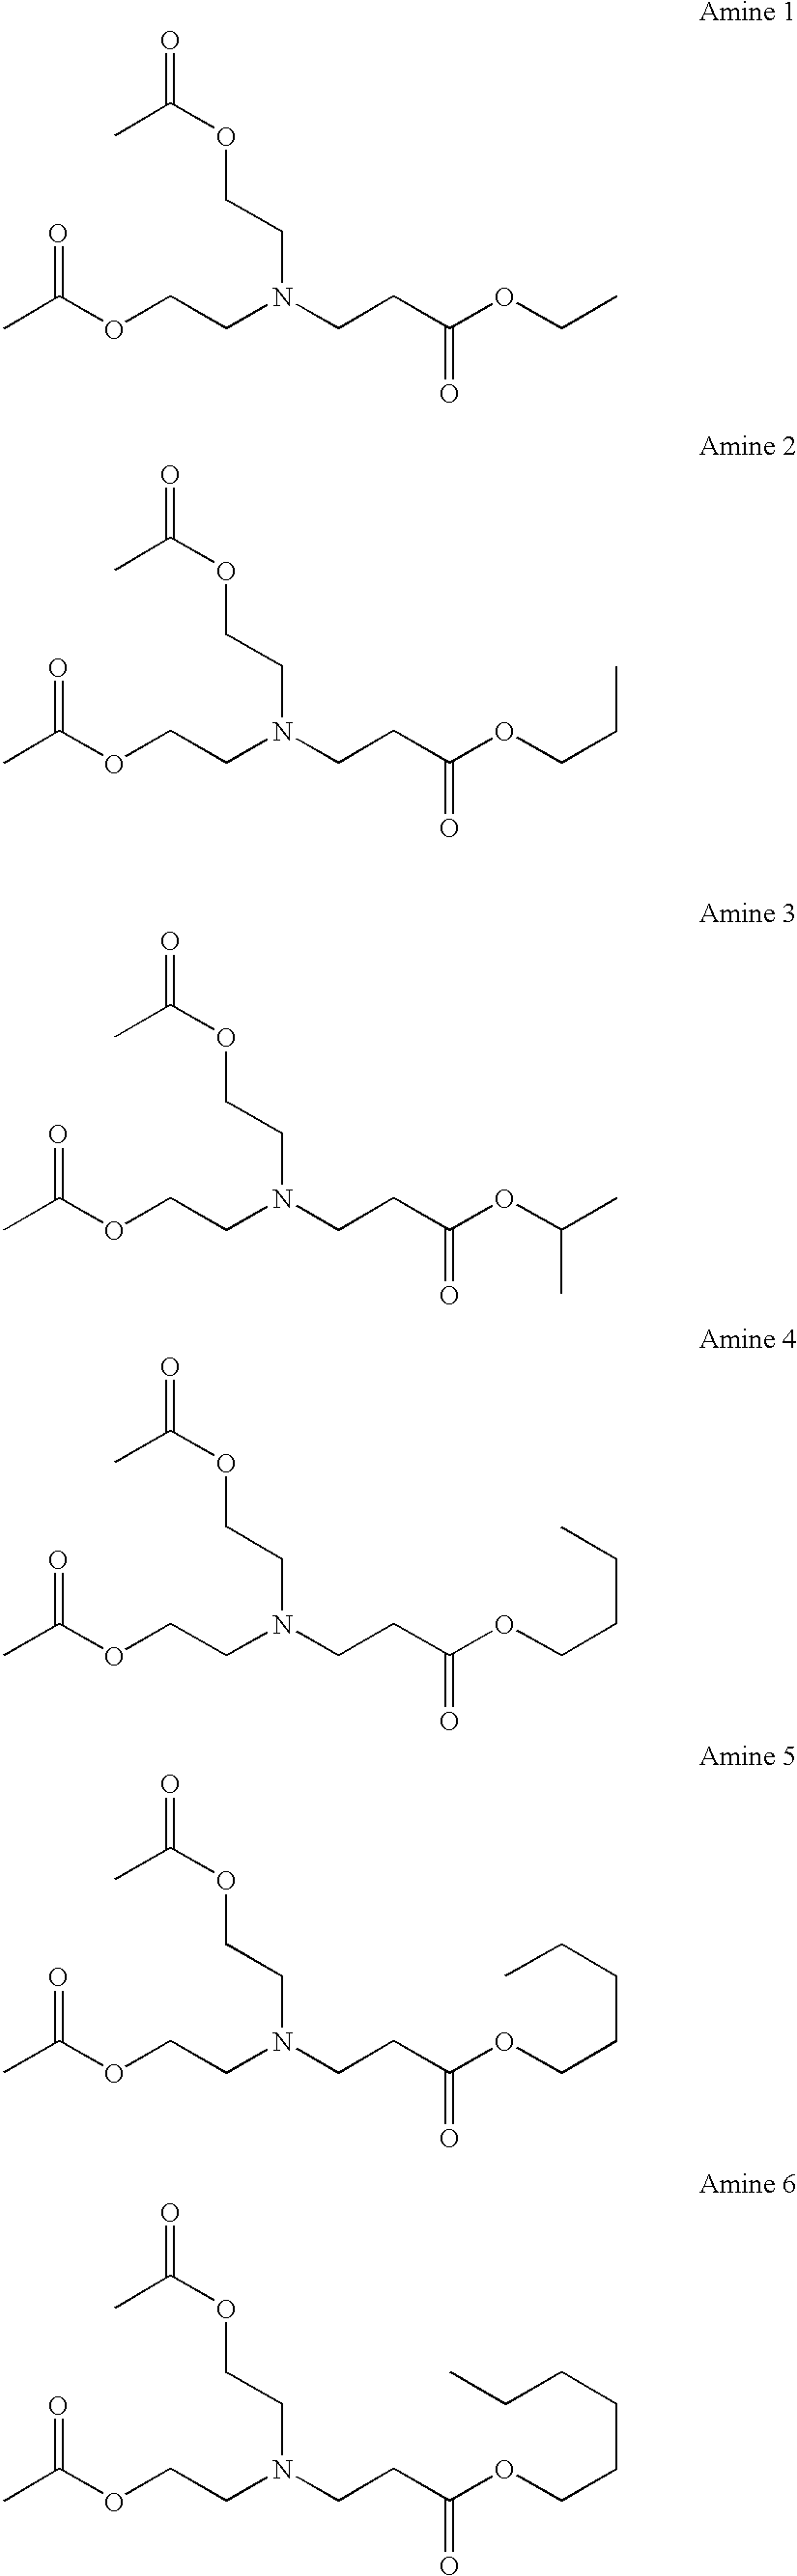 Tertiary amine compounds having an ester structure and processes for preparing same